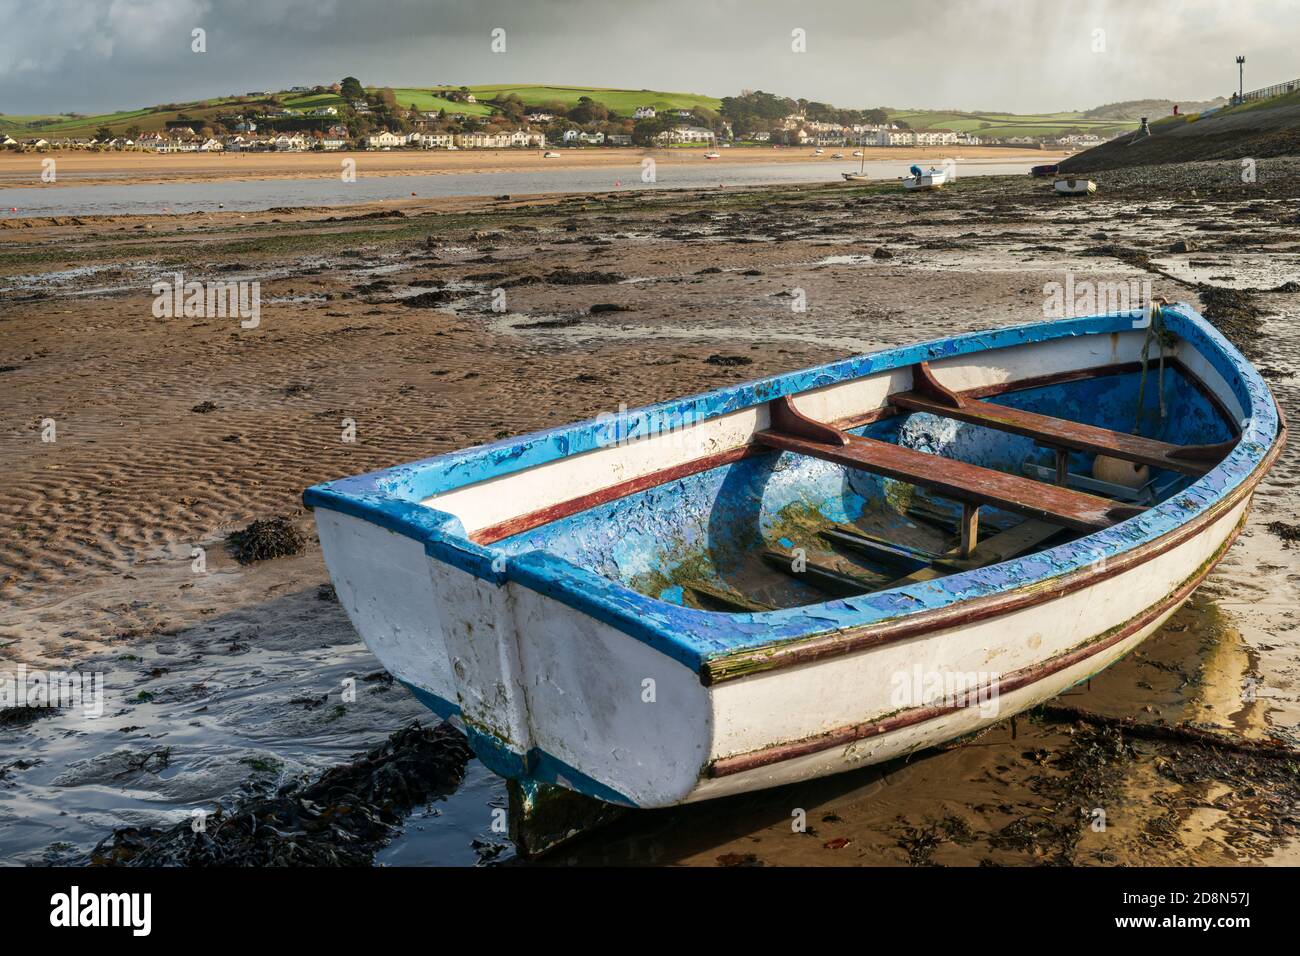 Appledore, North Devon, England. Saturday 31st October 2020. UK Weather. A day of bright sunshine and intermittent heavy downpours over the River Torridge estuary at the picturesque vilages of Appledore and Instow in North Devon. Credit: Terry Mathews/Alamy Live News Stock Photo